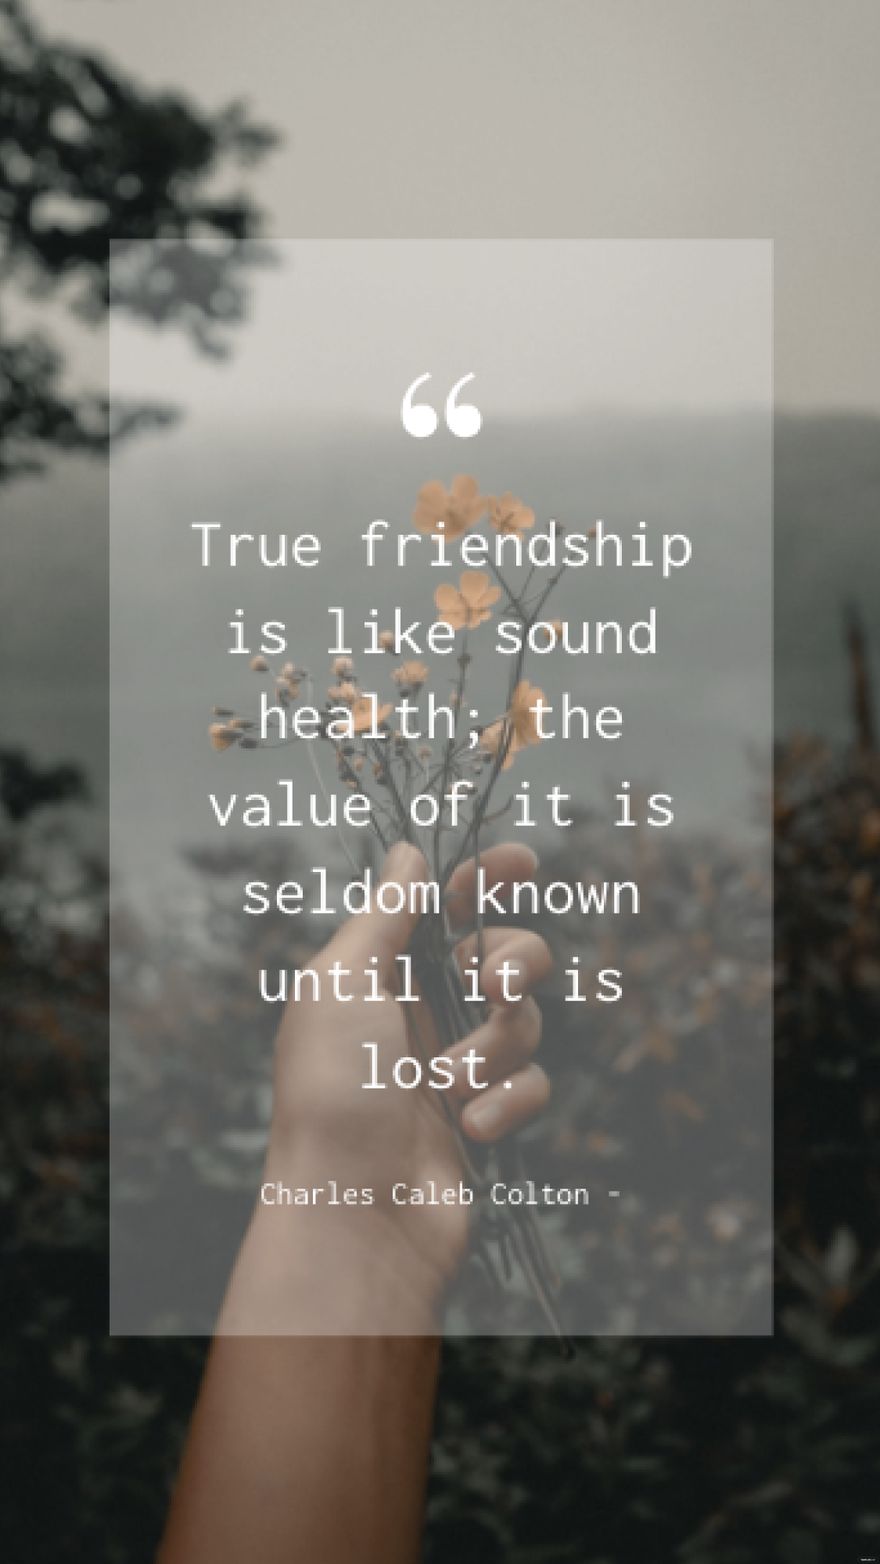 Charles Caleb Colton - True friendship is like sound health; the value of it is seldom known until it is lost.